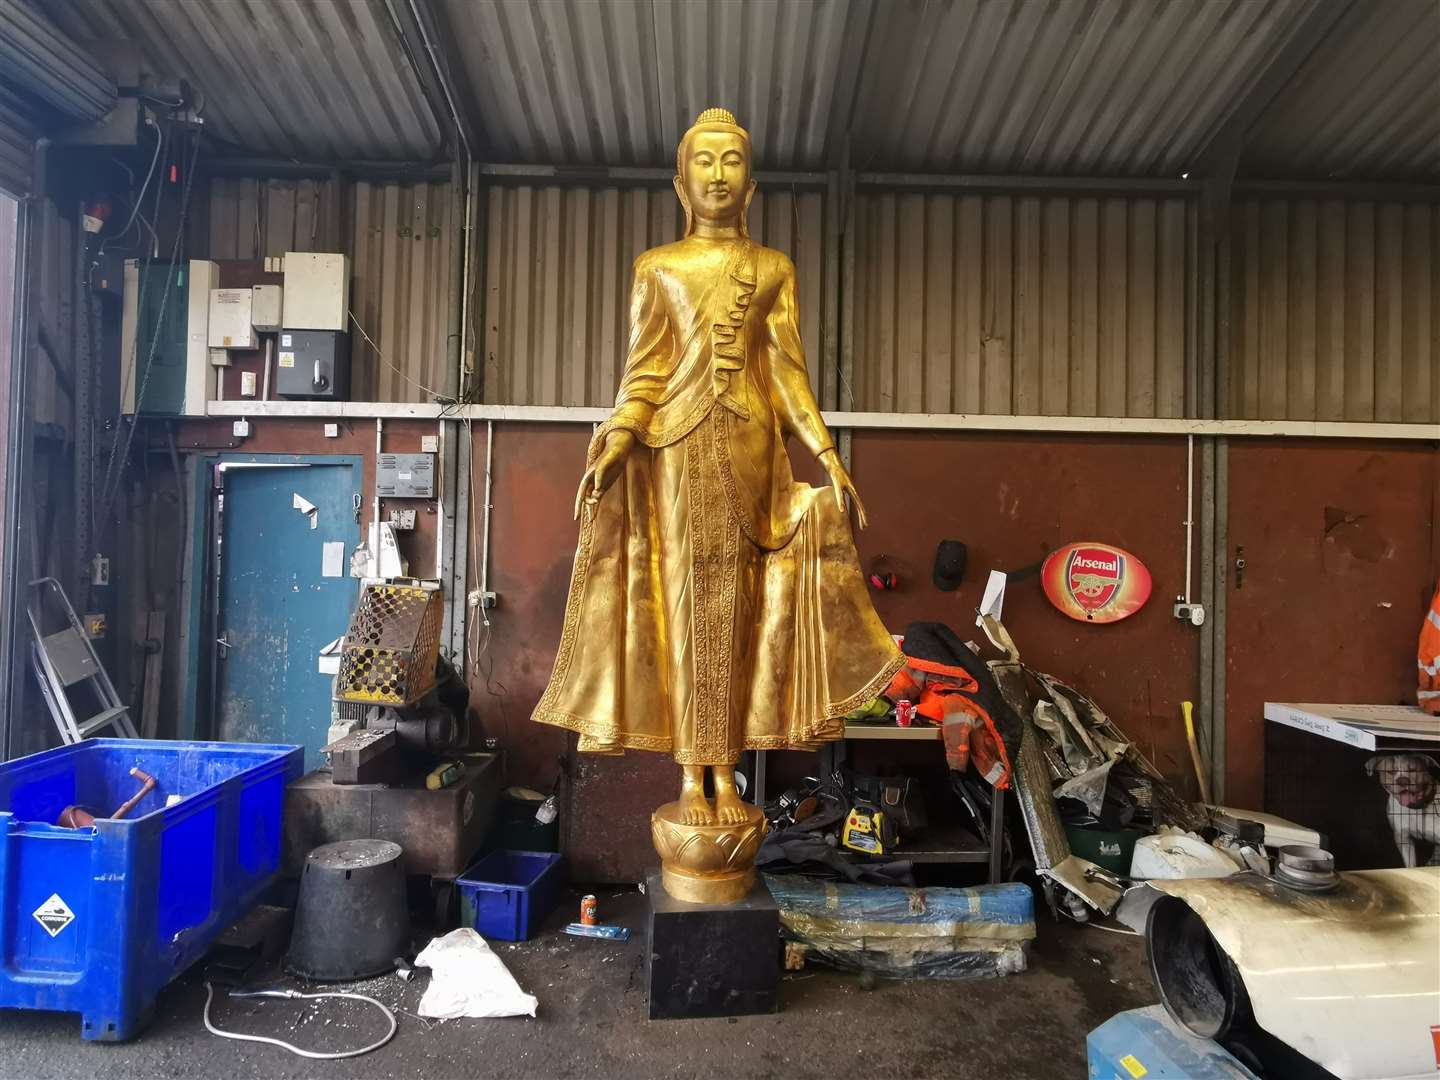 The 11ft tall bronze statue, which is due to be scrapped